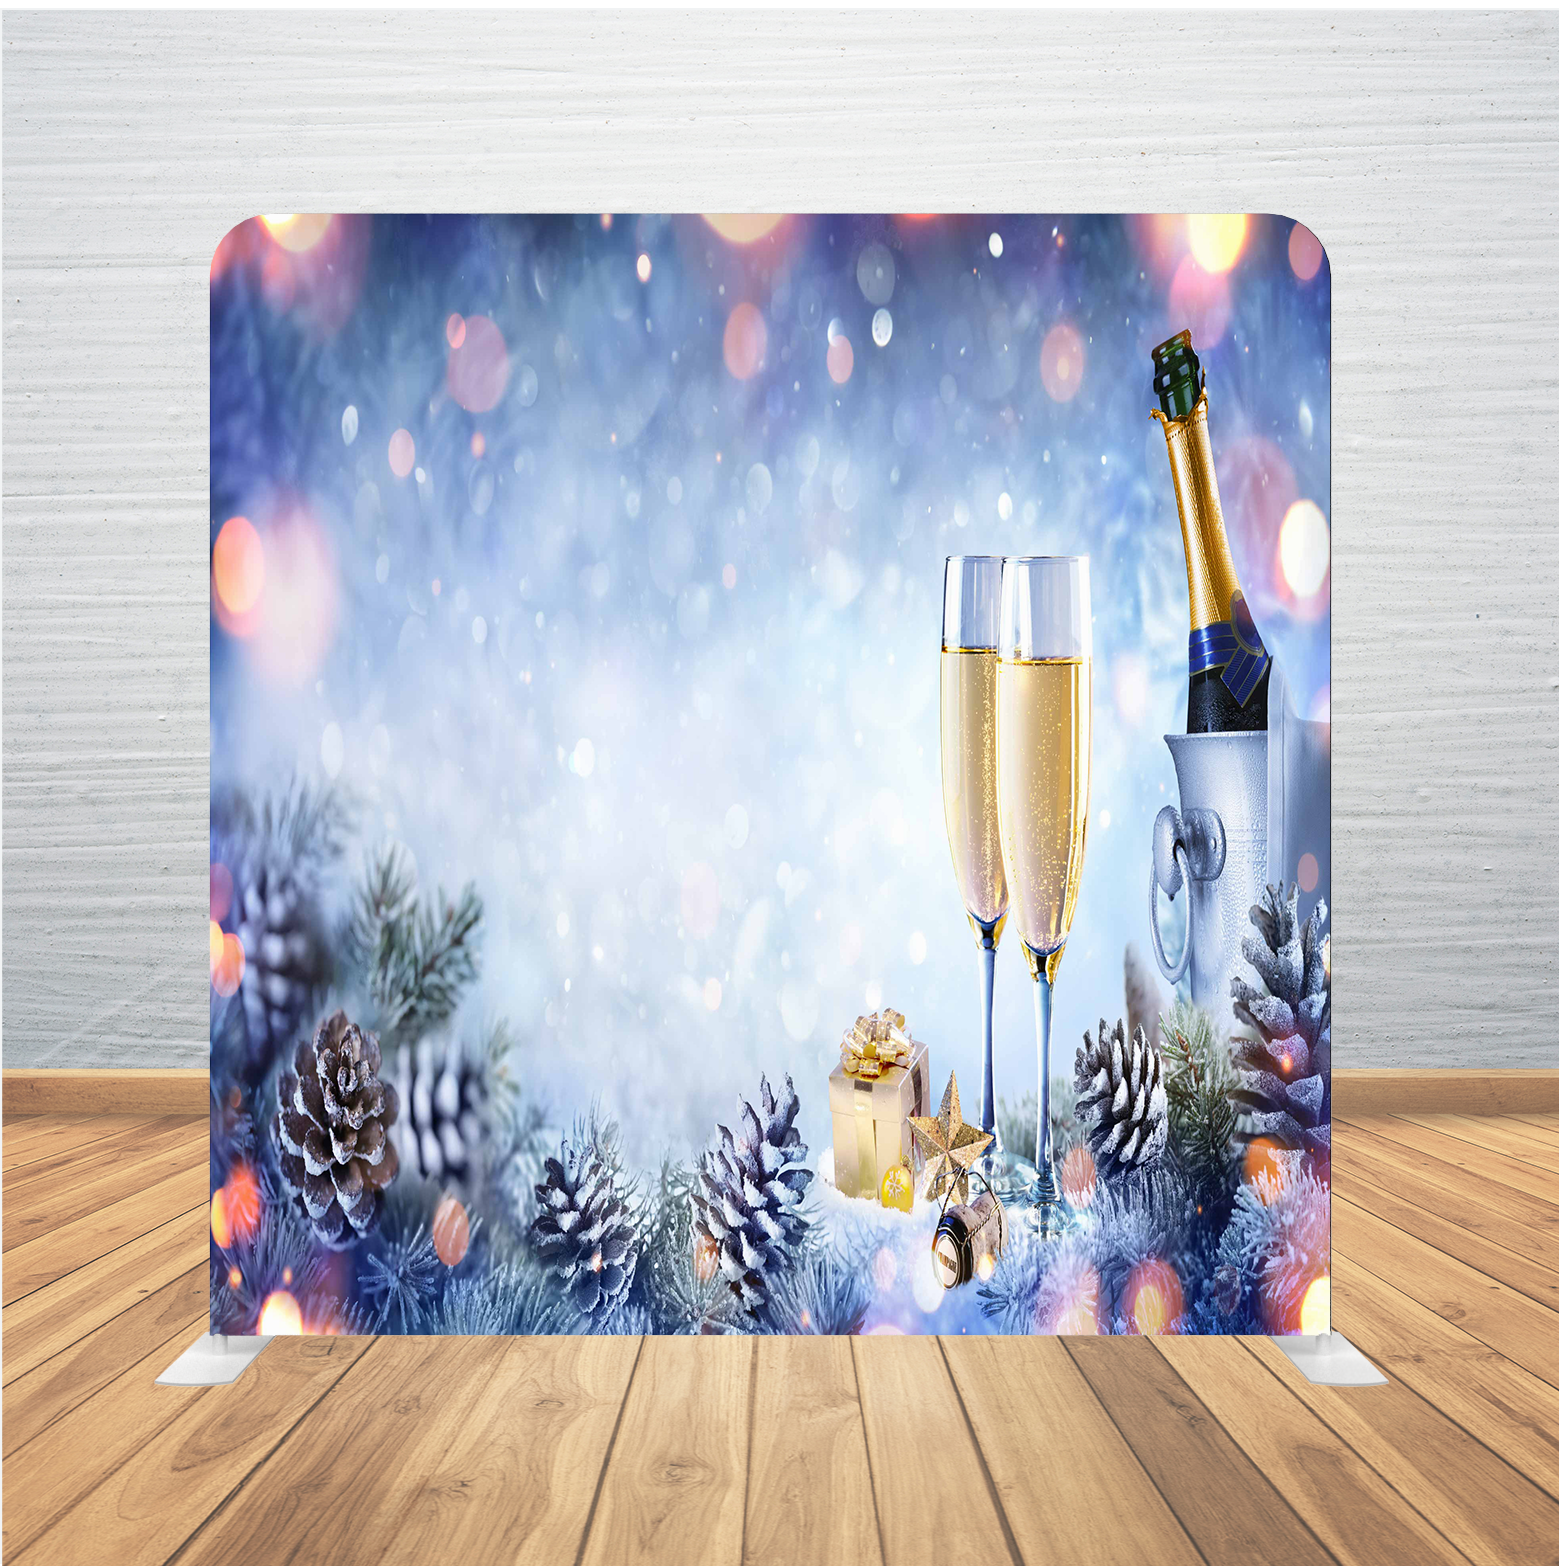 8X8 Pillowcase Tension Backdrop- Holiday Champagne